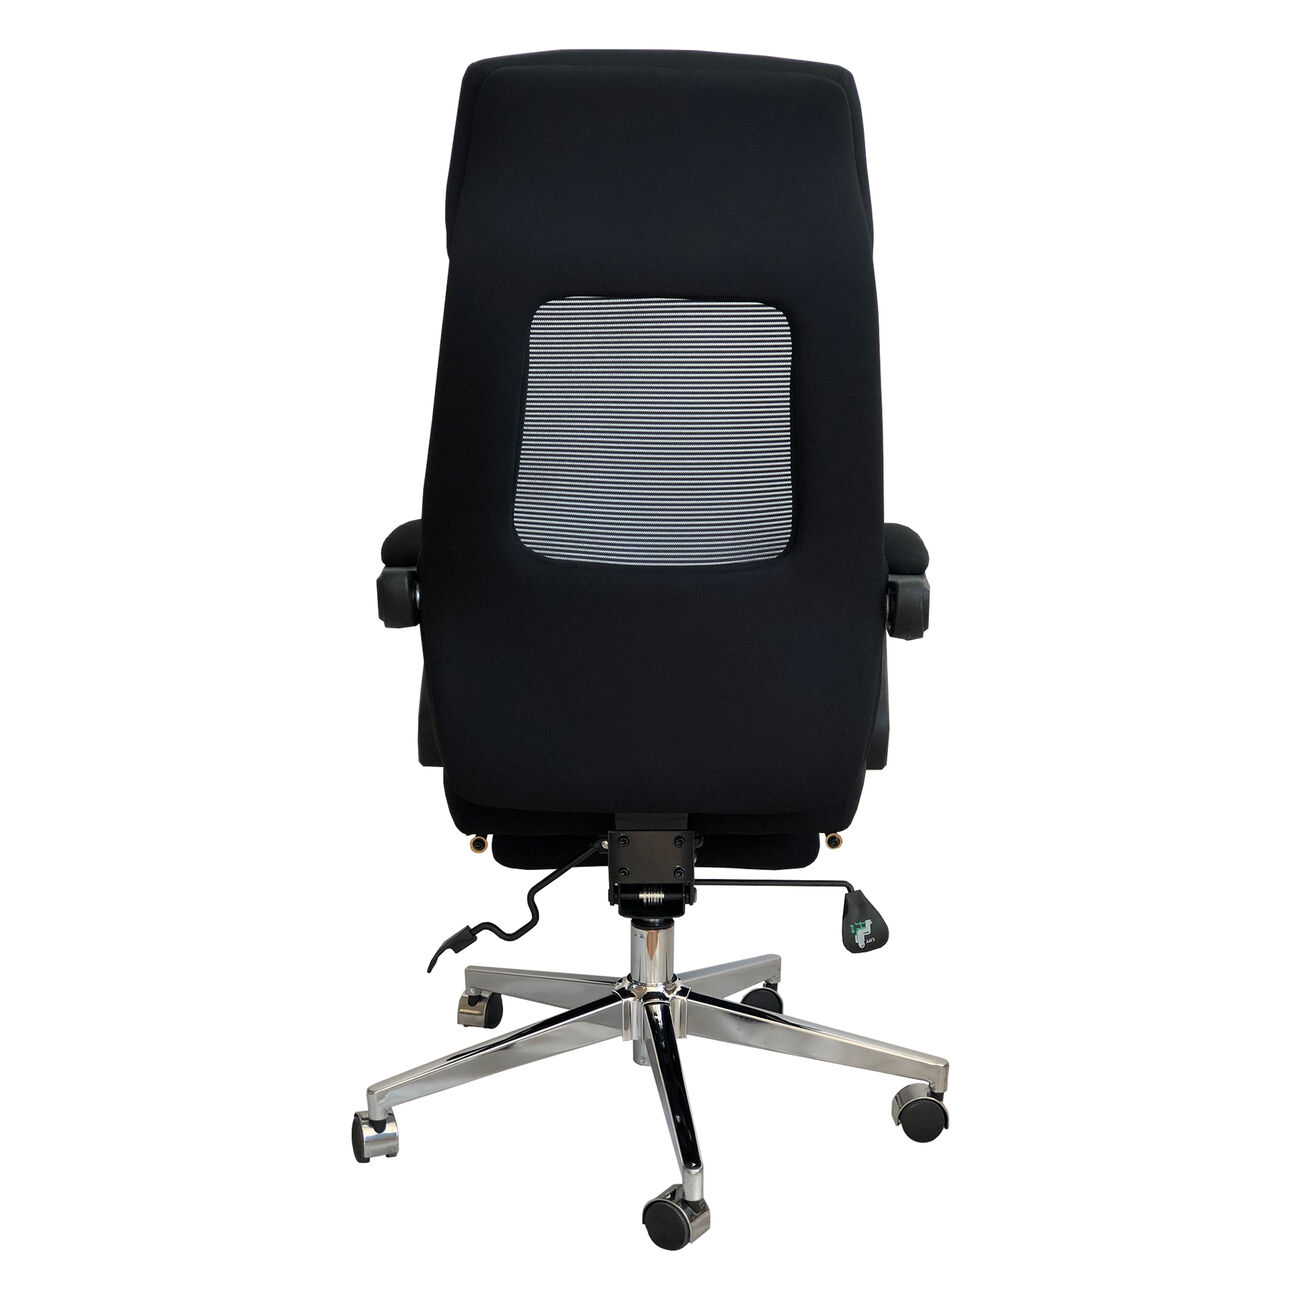 Position Lock Ergonomic Swivel Office Chair with Fabric Seat and Retractable Footrest, Black